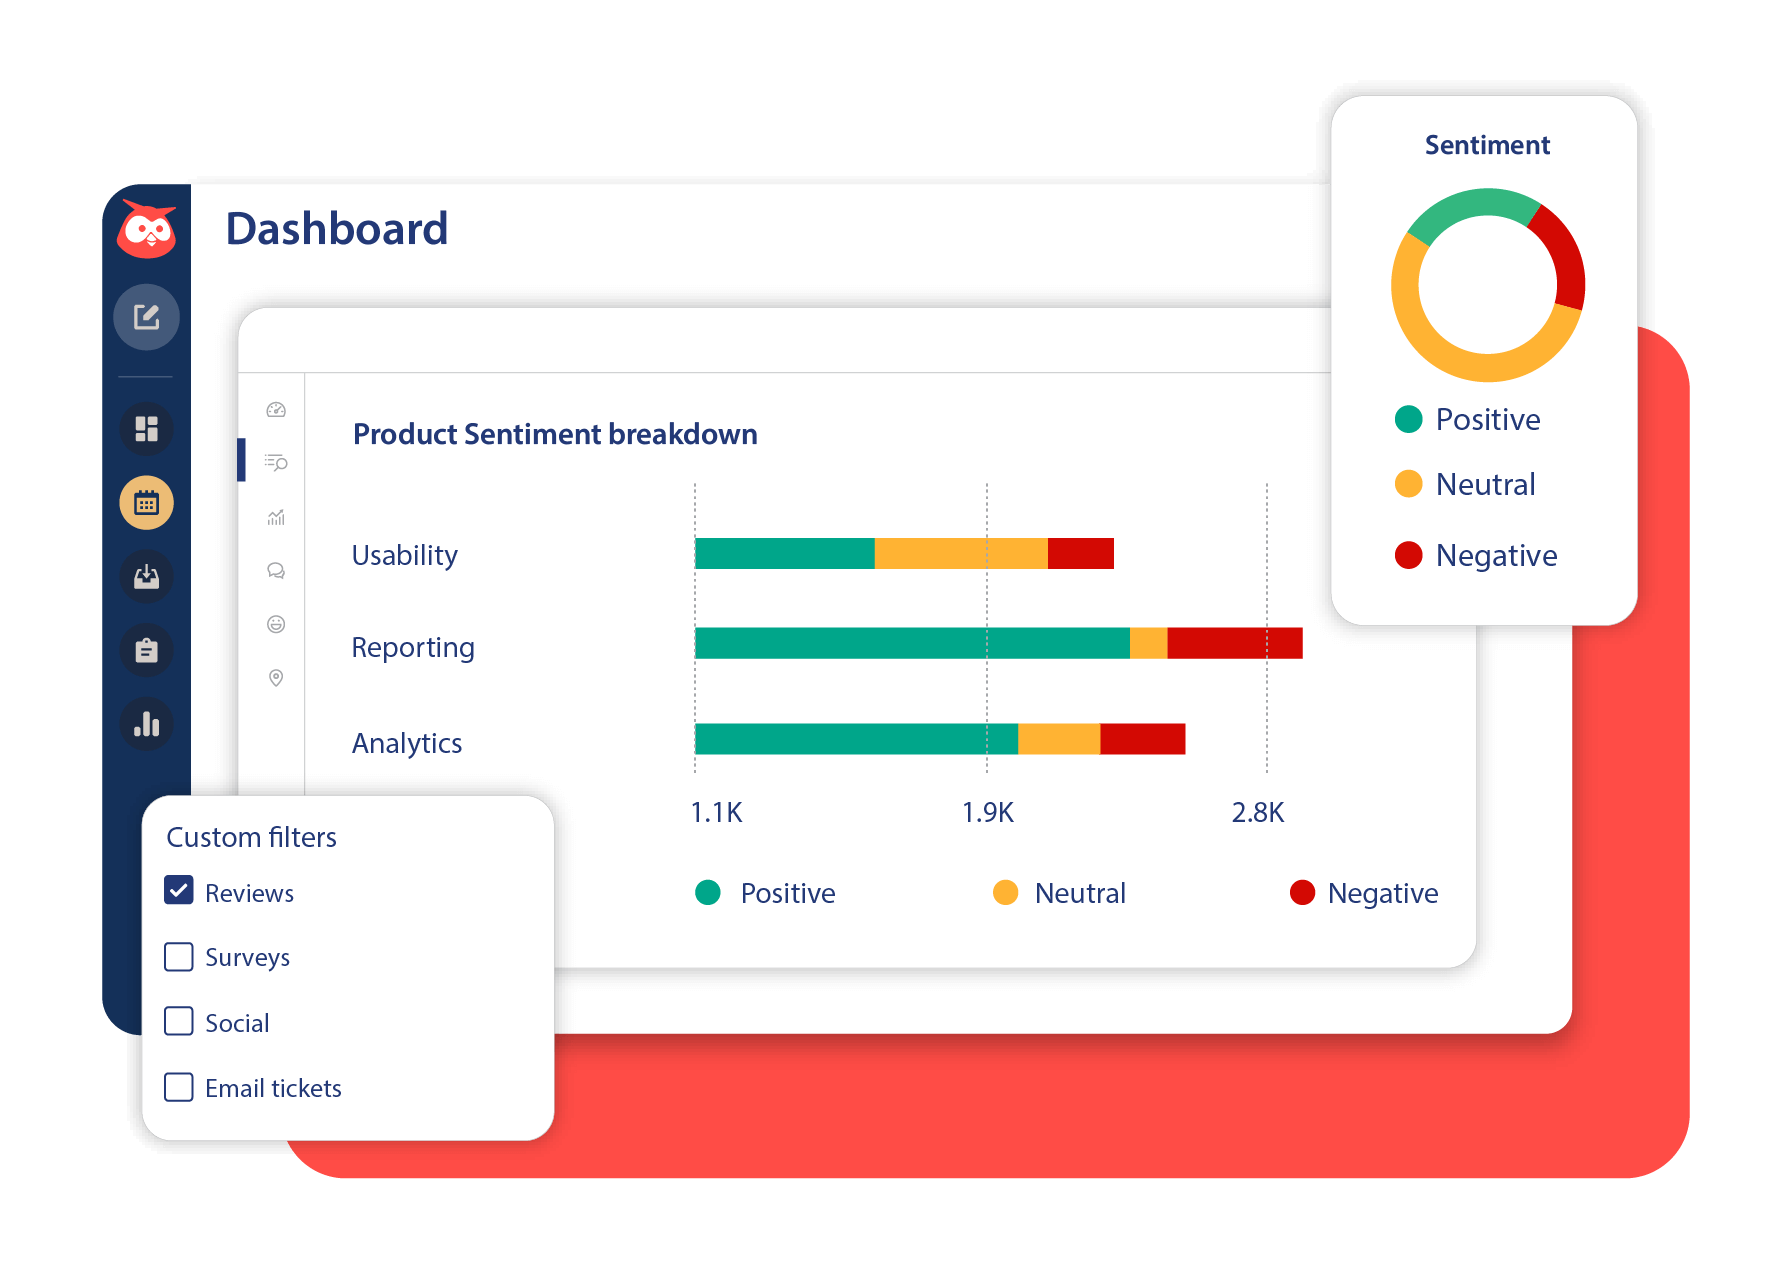 Product sentiment dashboard displaying breakdown of positive, neutral, and negative feedback for usability, reporting, and analytics, with custom filters for reviews, surveys, social, and email tickets.